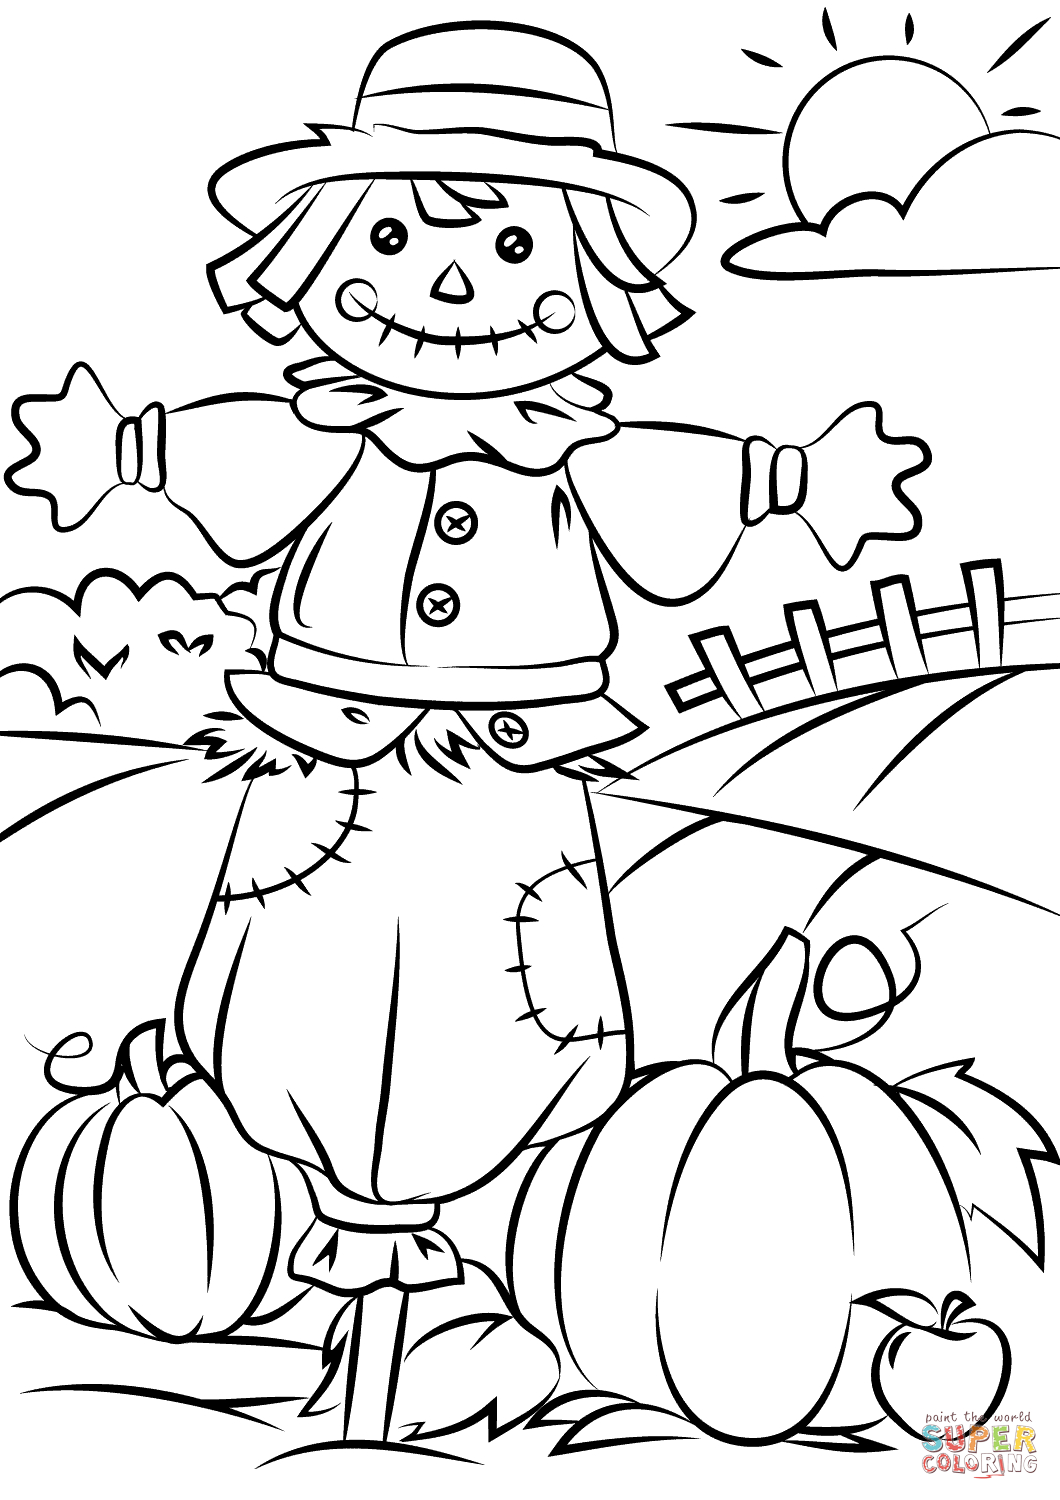 Autumn Scene With Scarecrow Coloring Page | Free Printable Coloring - Free Printable Coloring Pages Fall Season